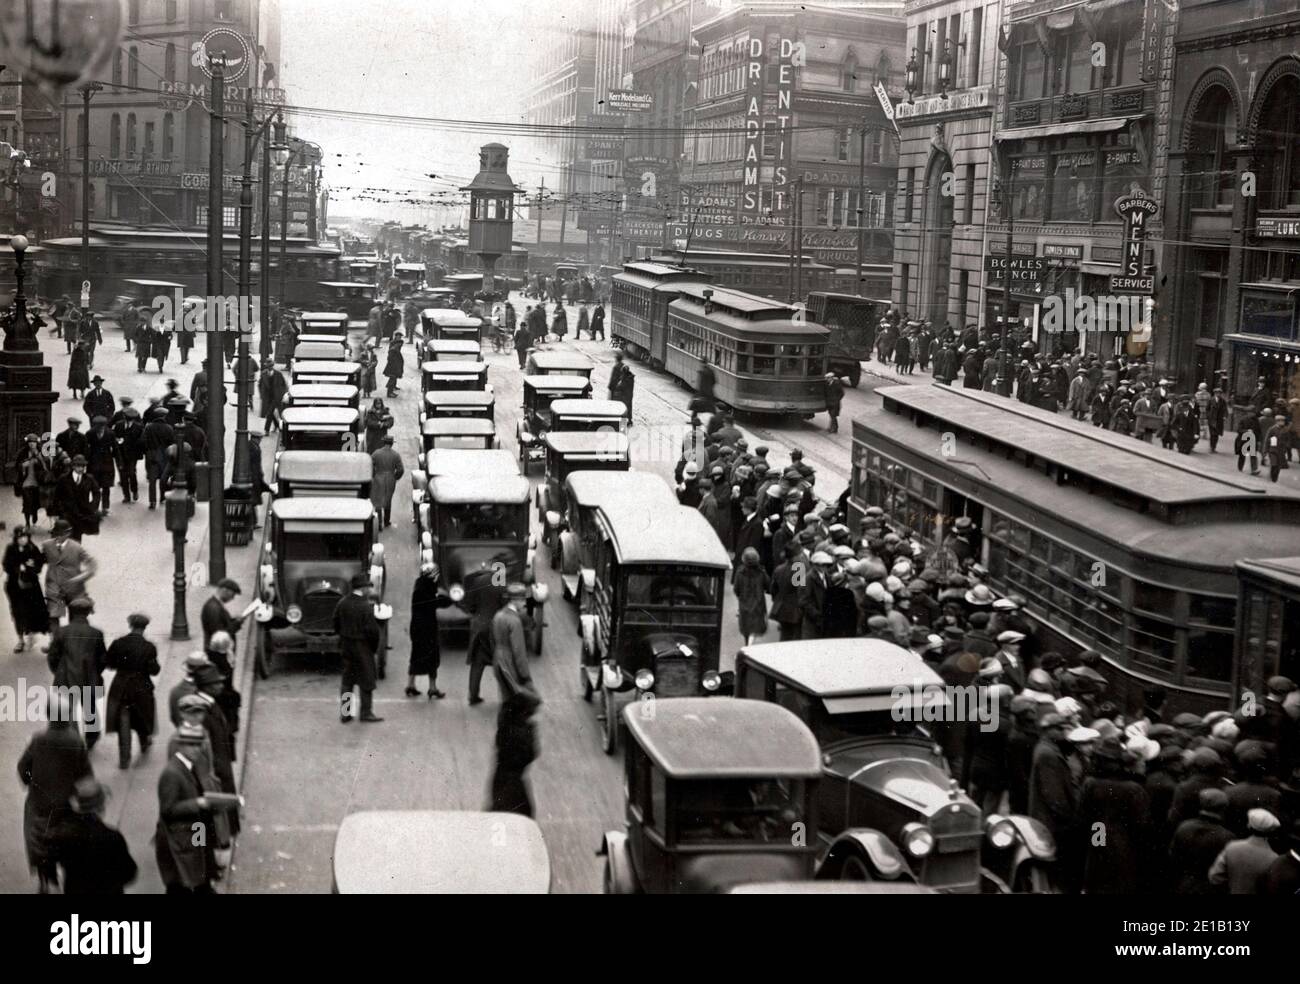 Corner of Michigan and Griswold. Great deal of car traffic, large group of people boarding trolley car. Large commercial buildings in background. Traffic tower in middle of street, with person standing inside, circa 1920 Stock Photo